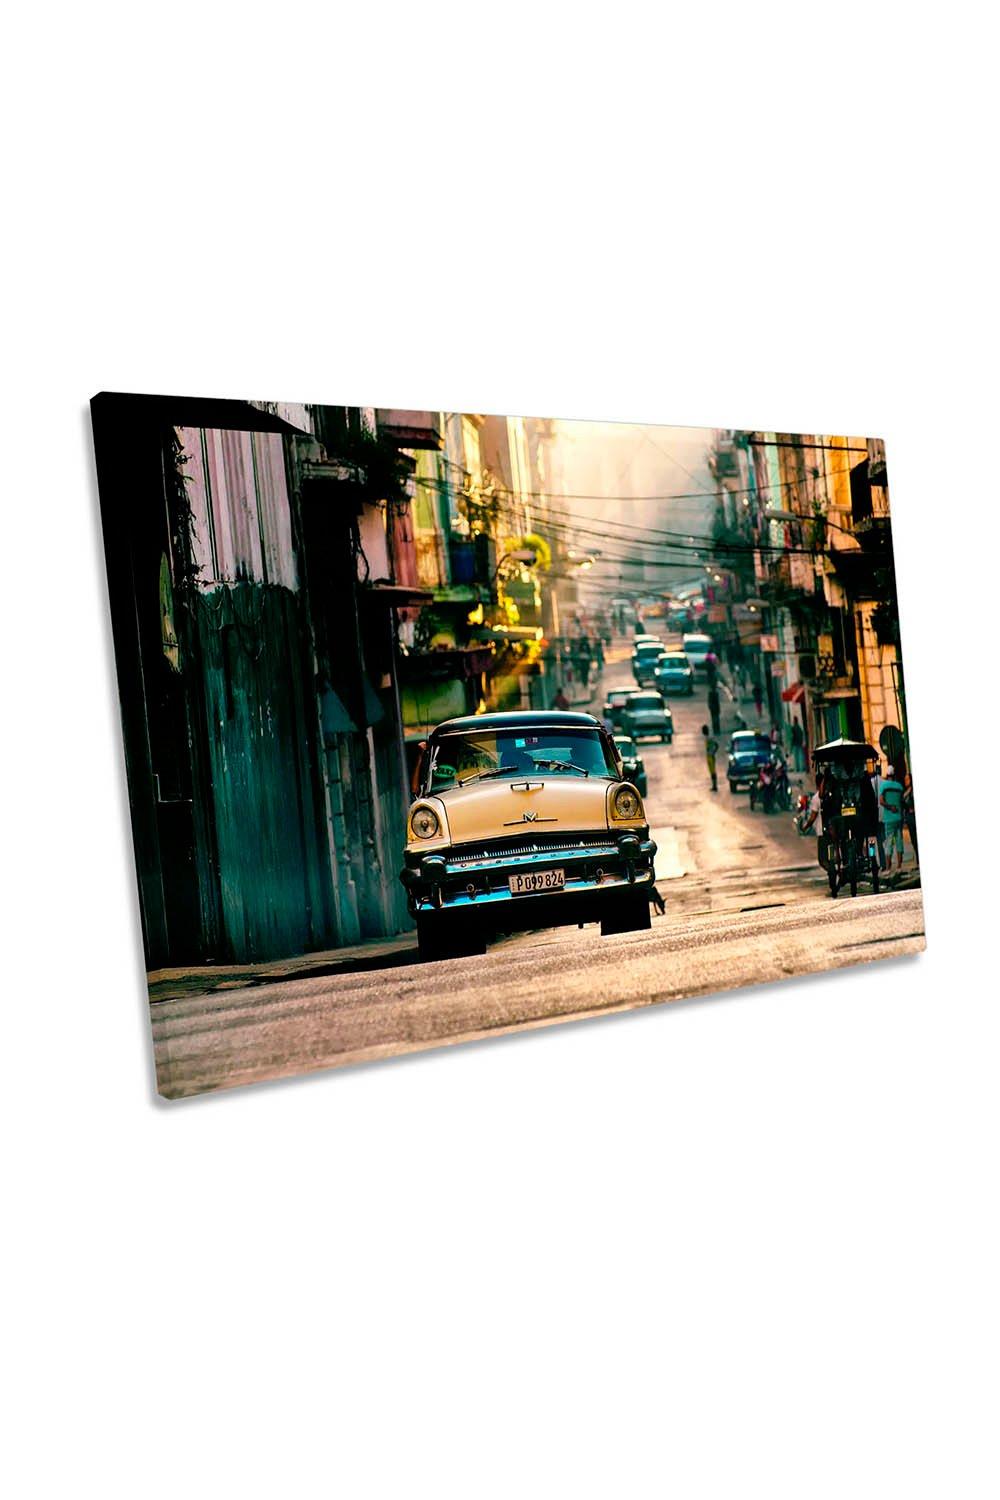 Cuba Streets Never-ending Story City Canvas Wall Art Picture Print